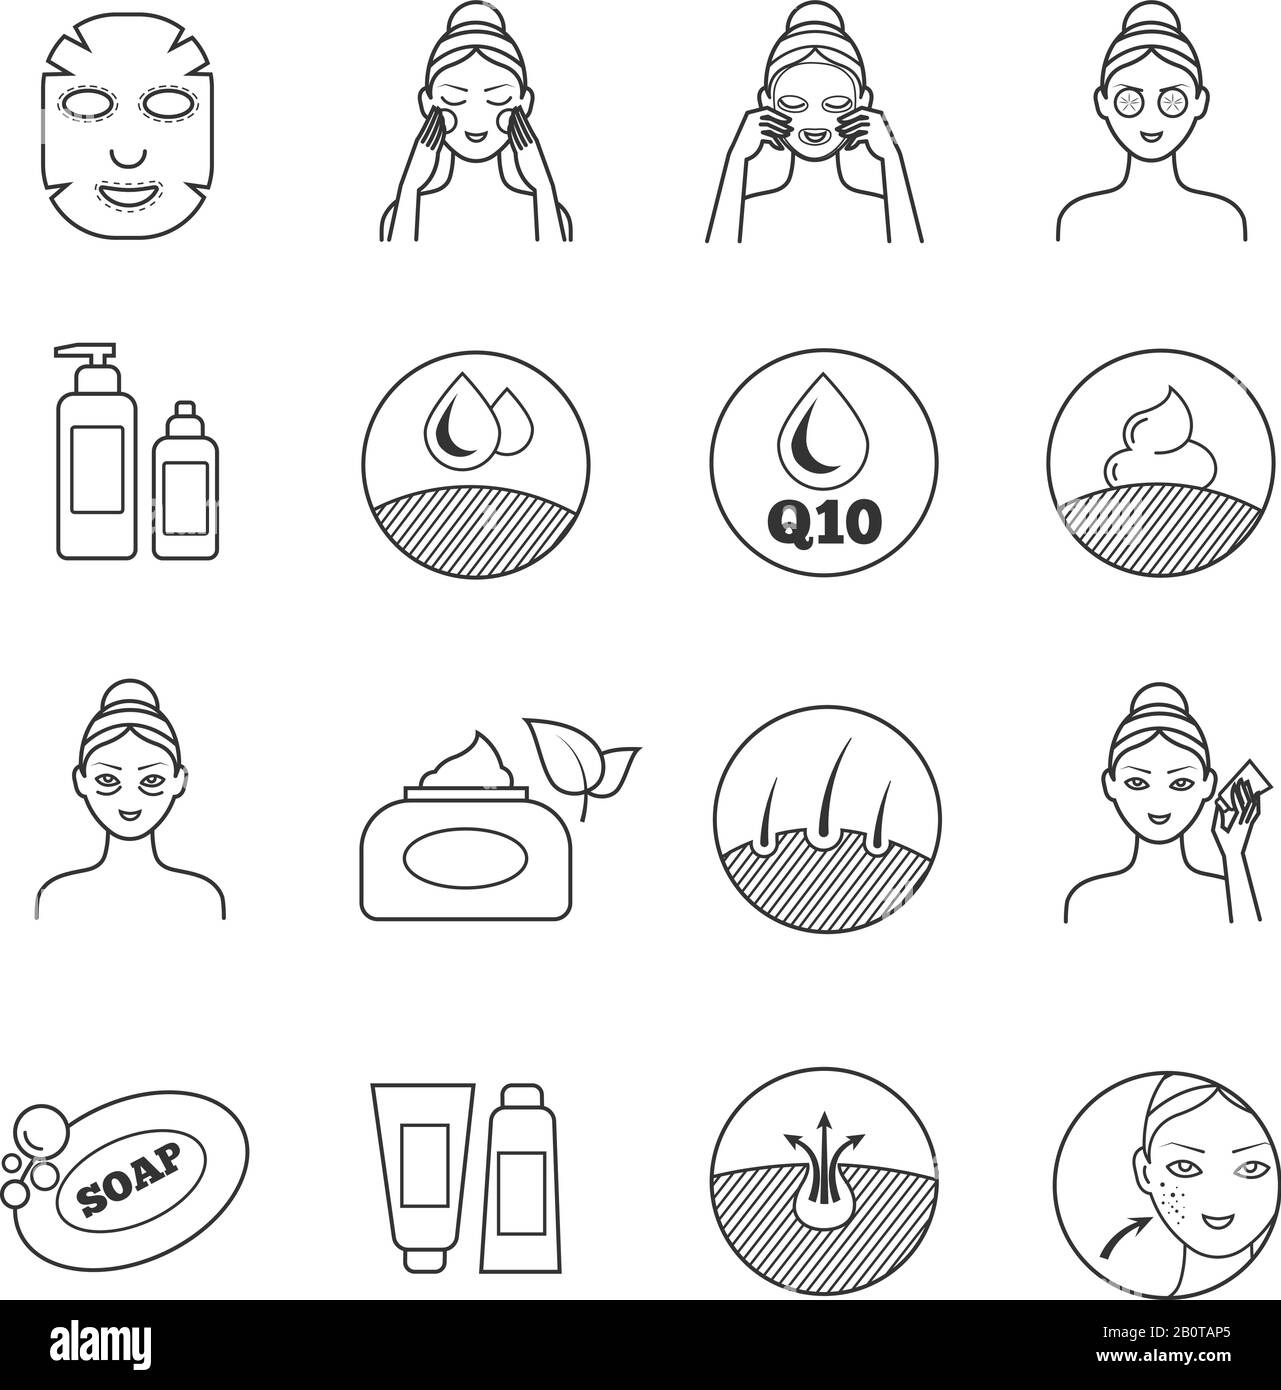 Skin care vector icons. Prevention of aging and eliminating of wrinkle pictograms. Cosmetic skin care, illustration of prevention of skin aging Stock Vector